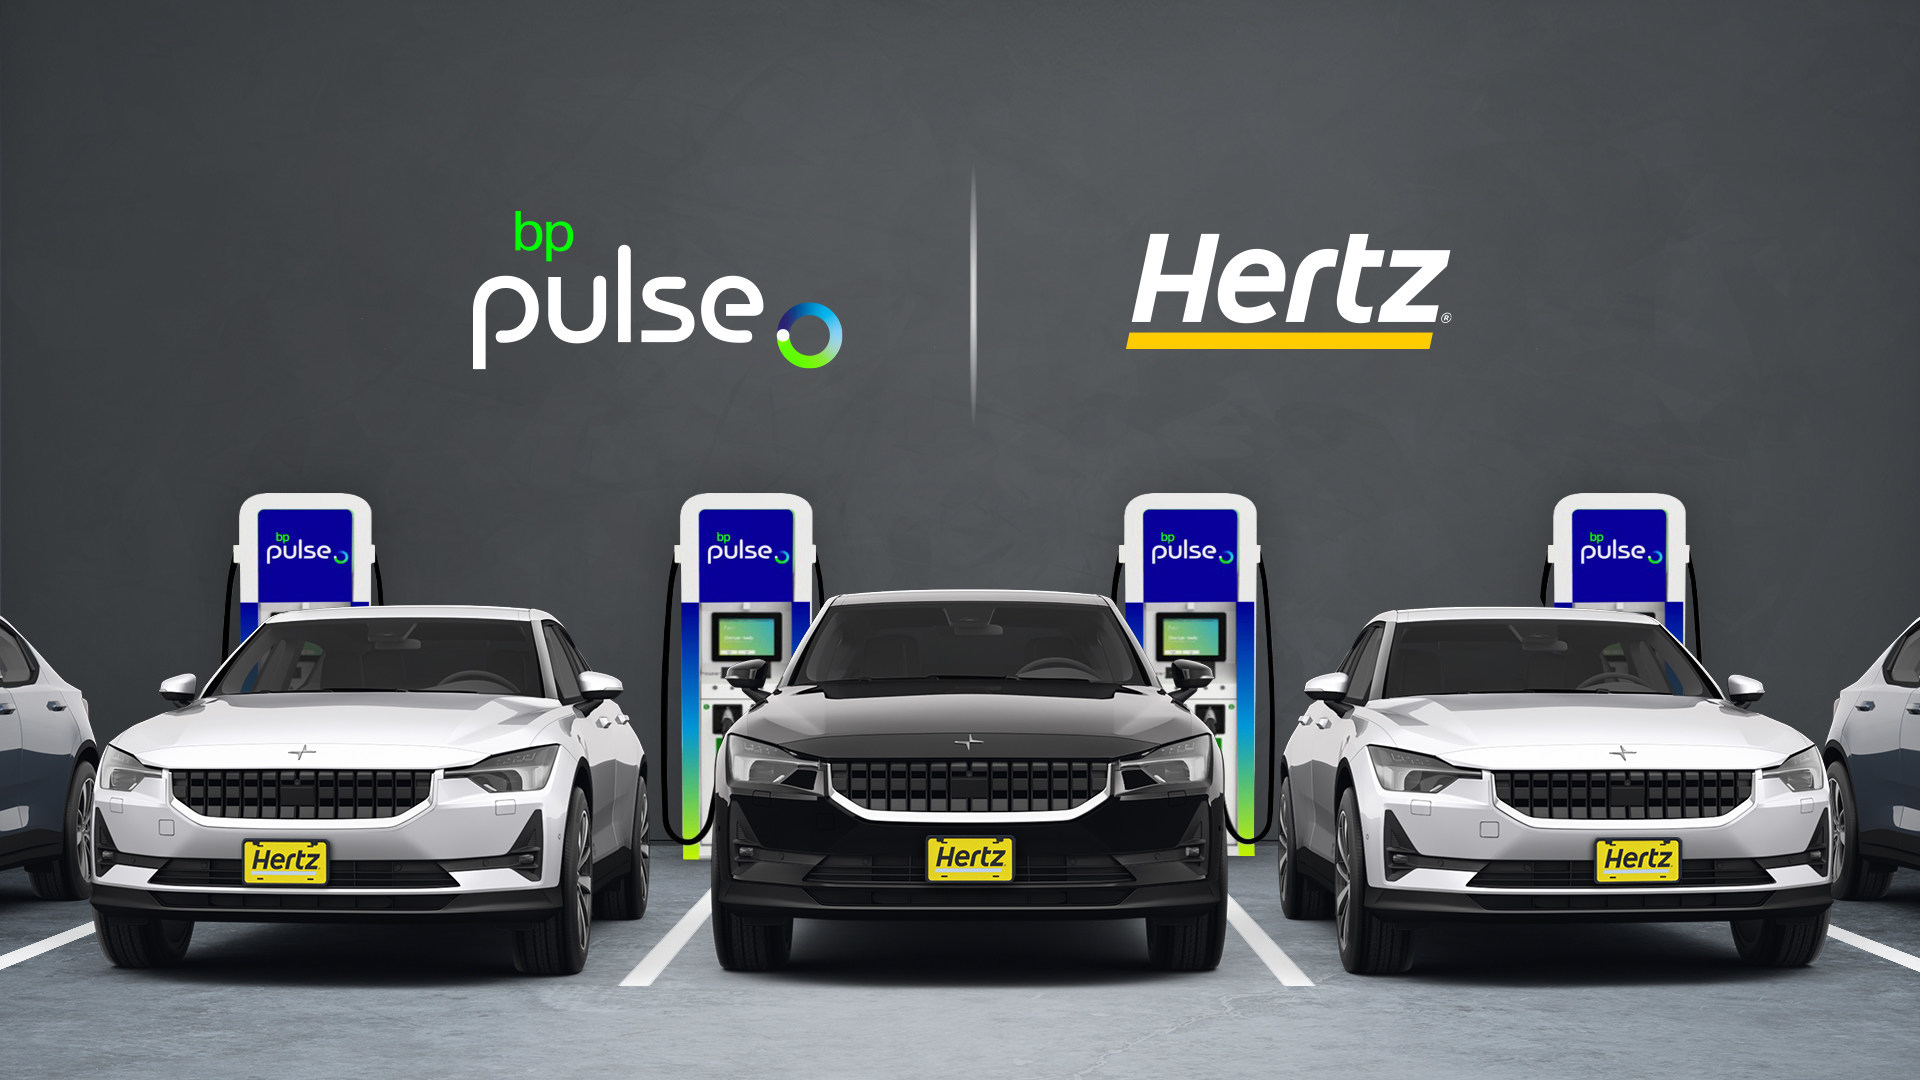 Hertz and BP Pulse plan to install a national network of EV charging solutions for Hertz and its customers